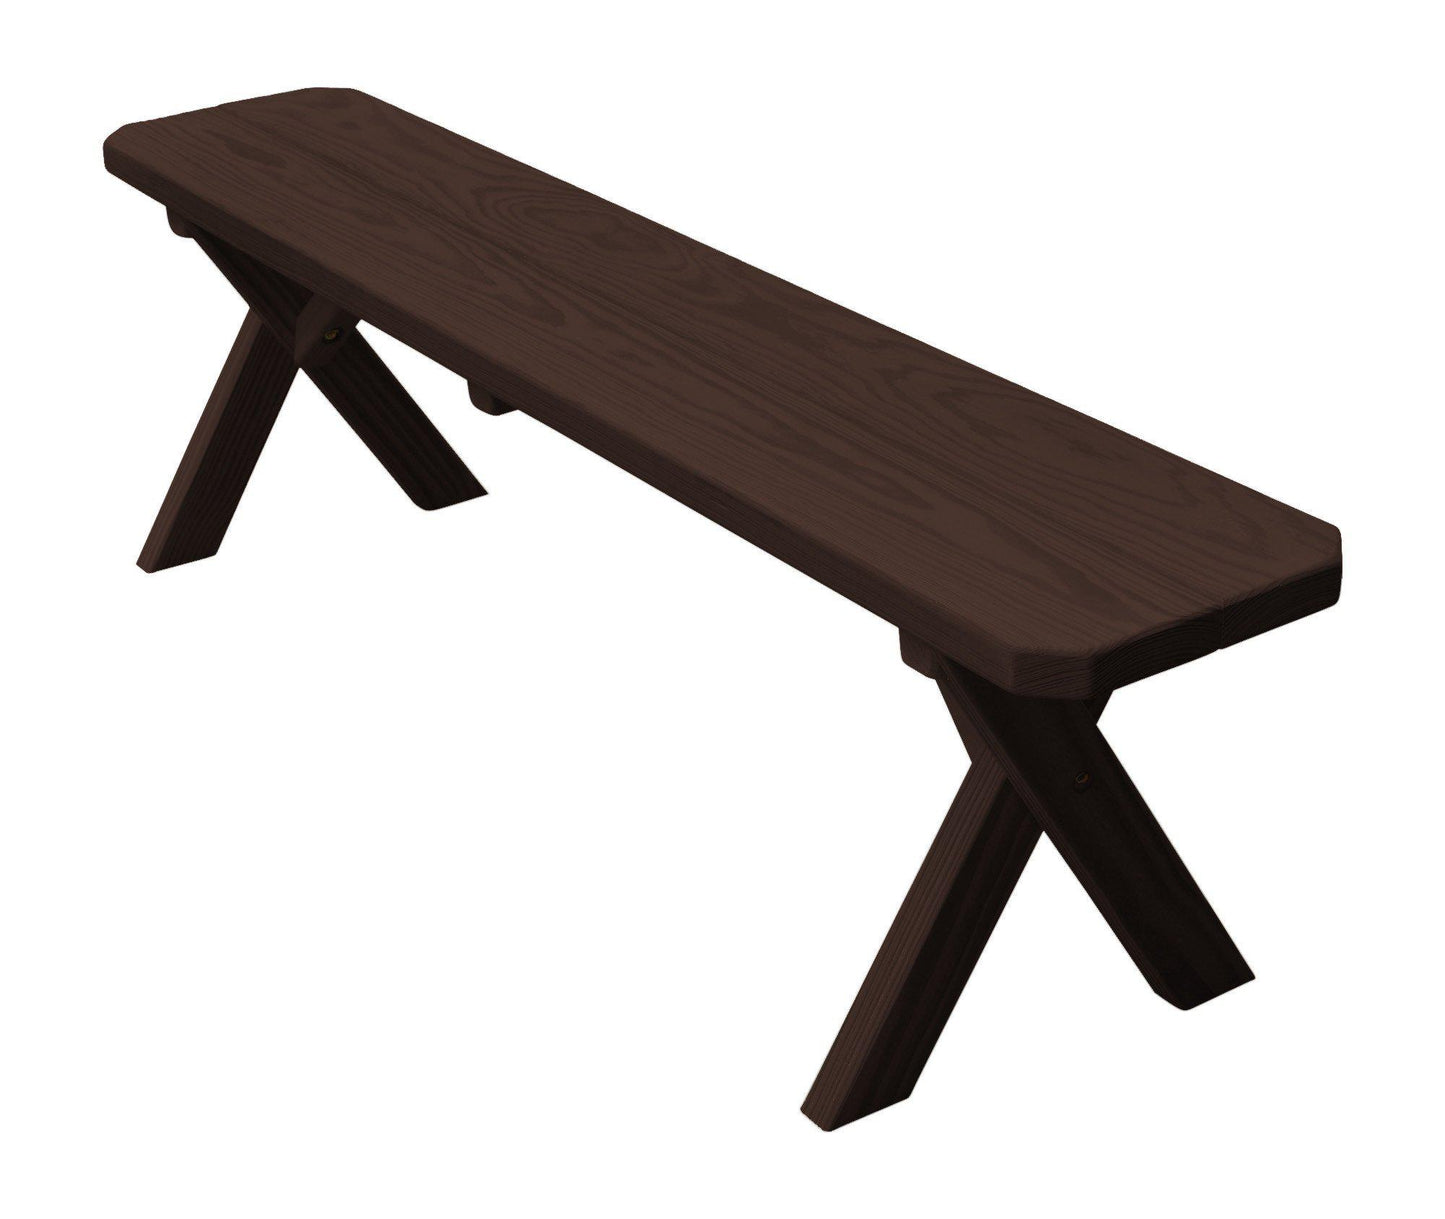 A&L Furniture Co. Pressure Treated Pine  55" Crossleg Bench Only - LEAD TIME TO SHIP 10 BUSINESS DAYS